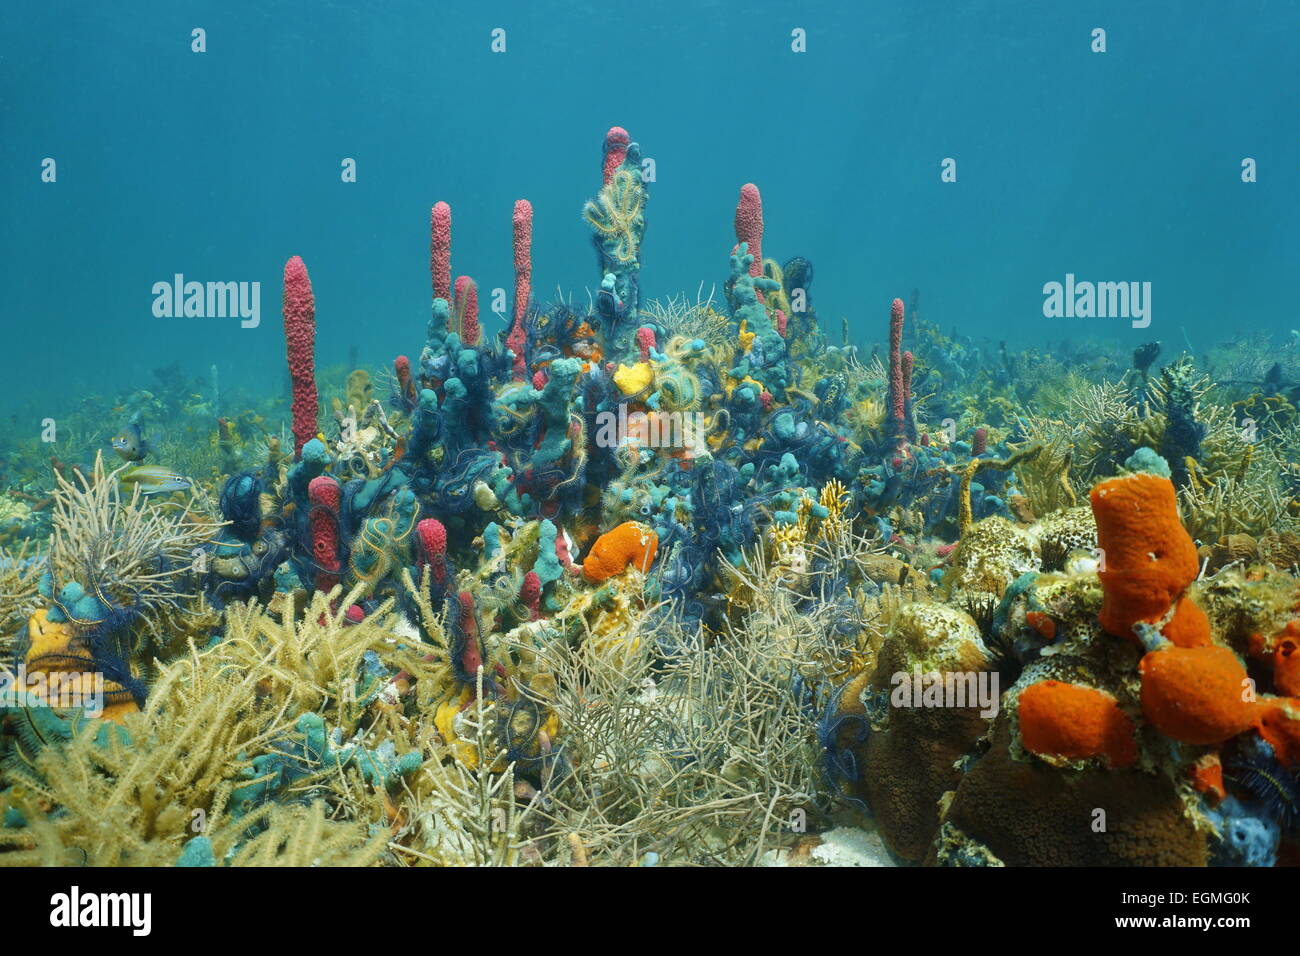 Underwater reef with thriving marine life composed by corals and colorful sponges covered by Brittle stars, Caribbean sea Stock Photo